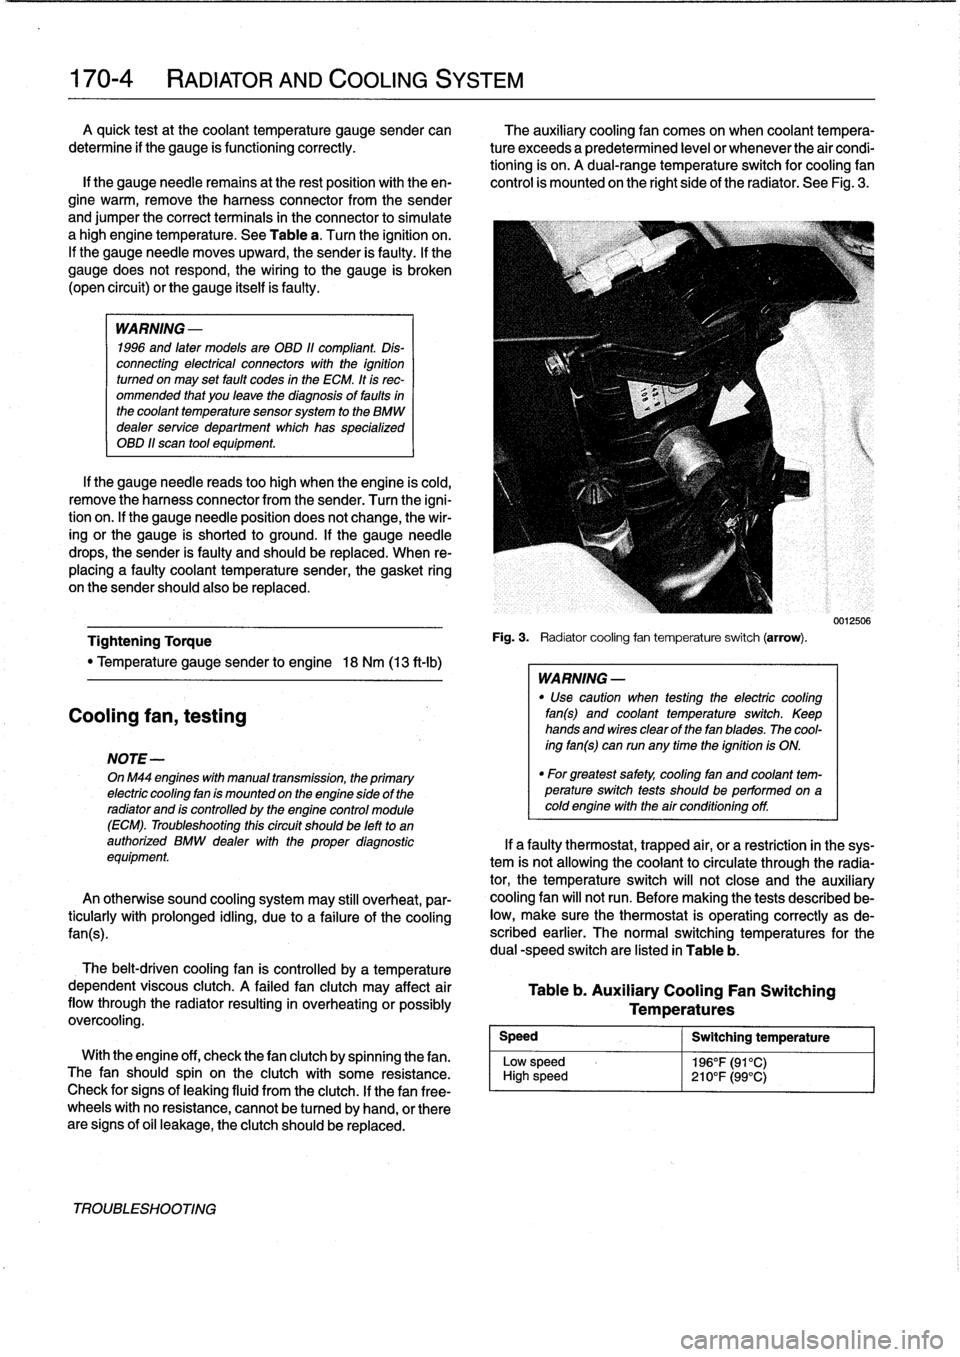 BMW 318i 1994 E36 Workshop Manual 
170-
4

	

RADIATOR
AND
COOLING
SYSTEM
A
quick
testat
the
coolant
temperature
gauge
sender
can

	

The
auxiliary
cooling
fan
comes
on
when
coolant
tempera

determine
if
the
gauge
is
functioning
corre